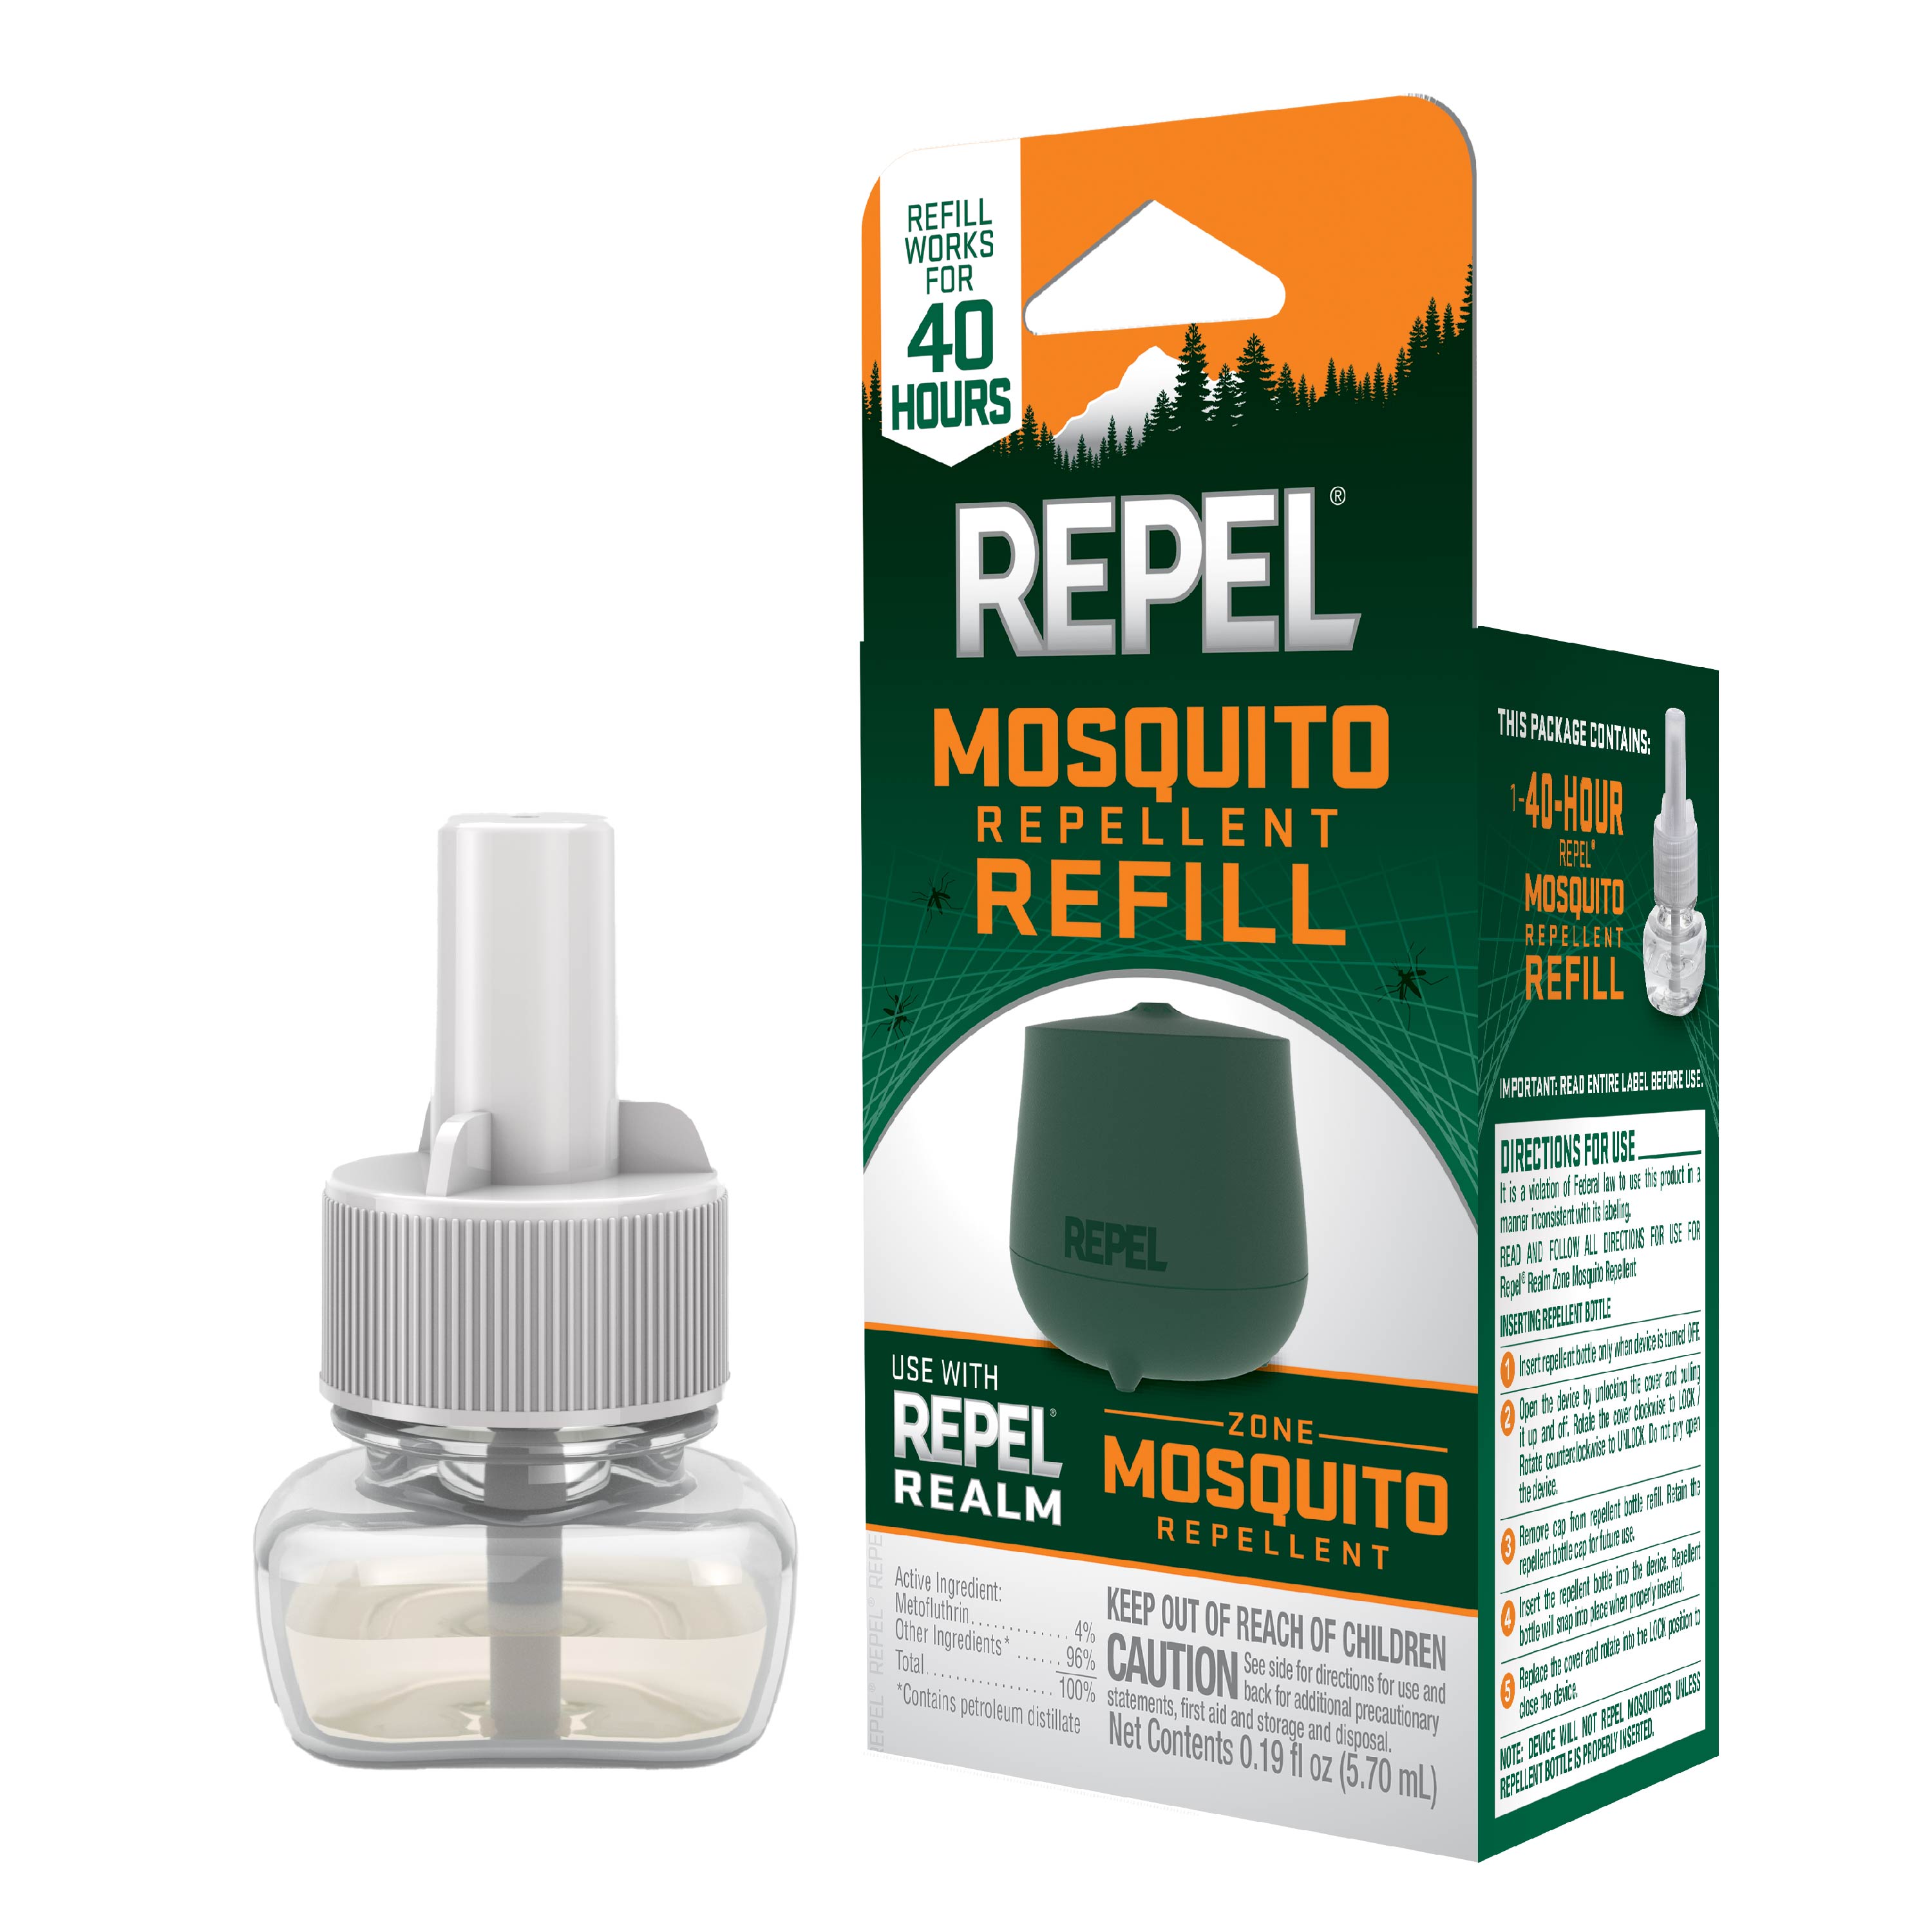 Repel® Realm™ Mosquito Repellent 40 Hour Refill